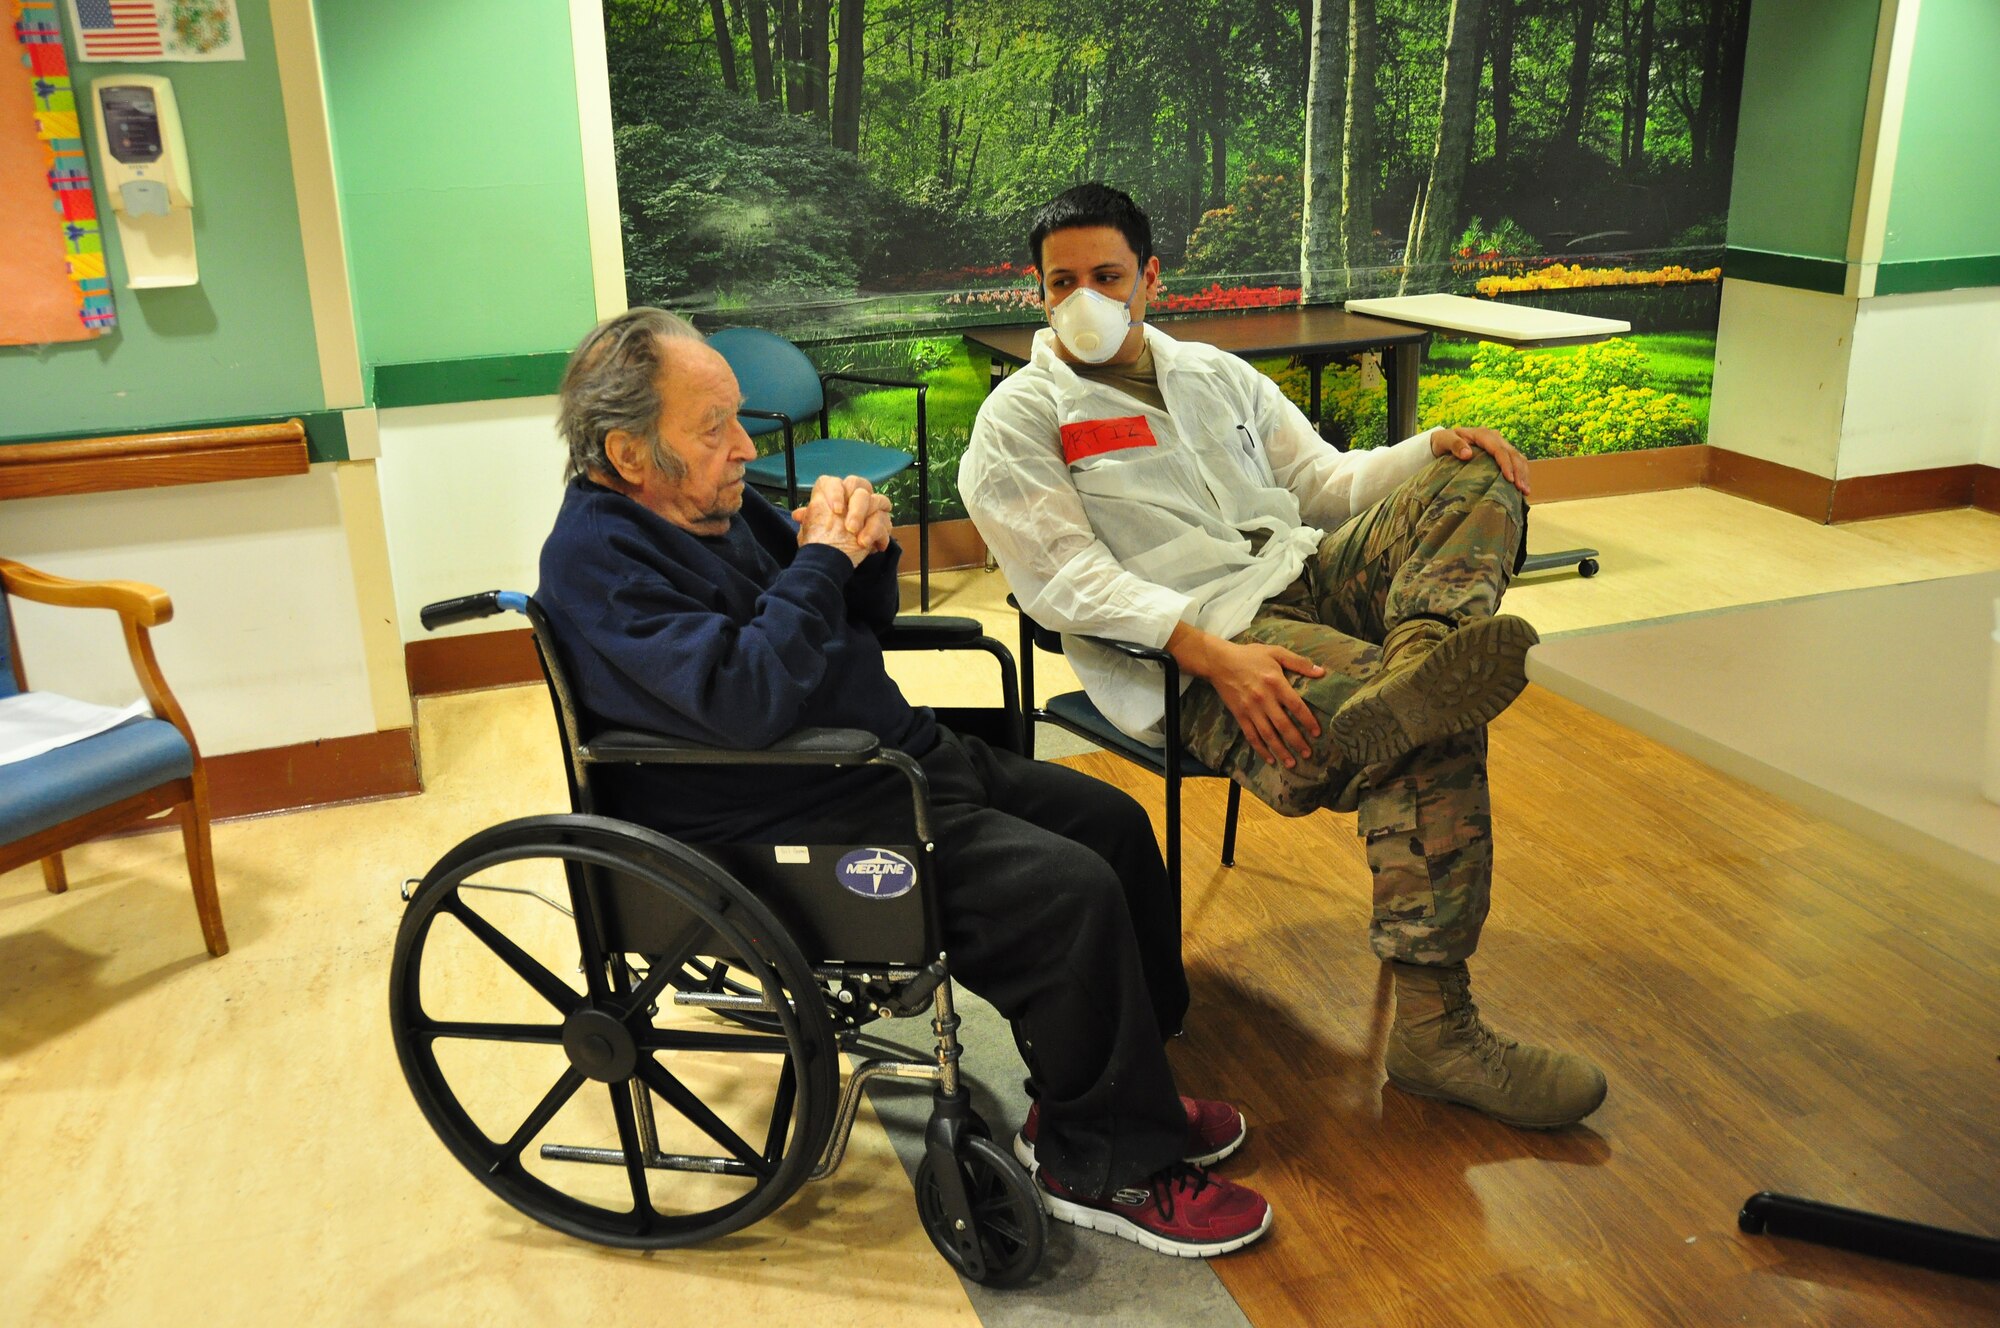 A picture of U.S. Army Spc. Daniel Ortiz, a Combat Medic with the 1st Battalion, 114th Infantry Regiment, New Jersey Army National Guard, spending time with a resident